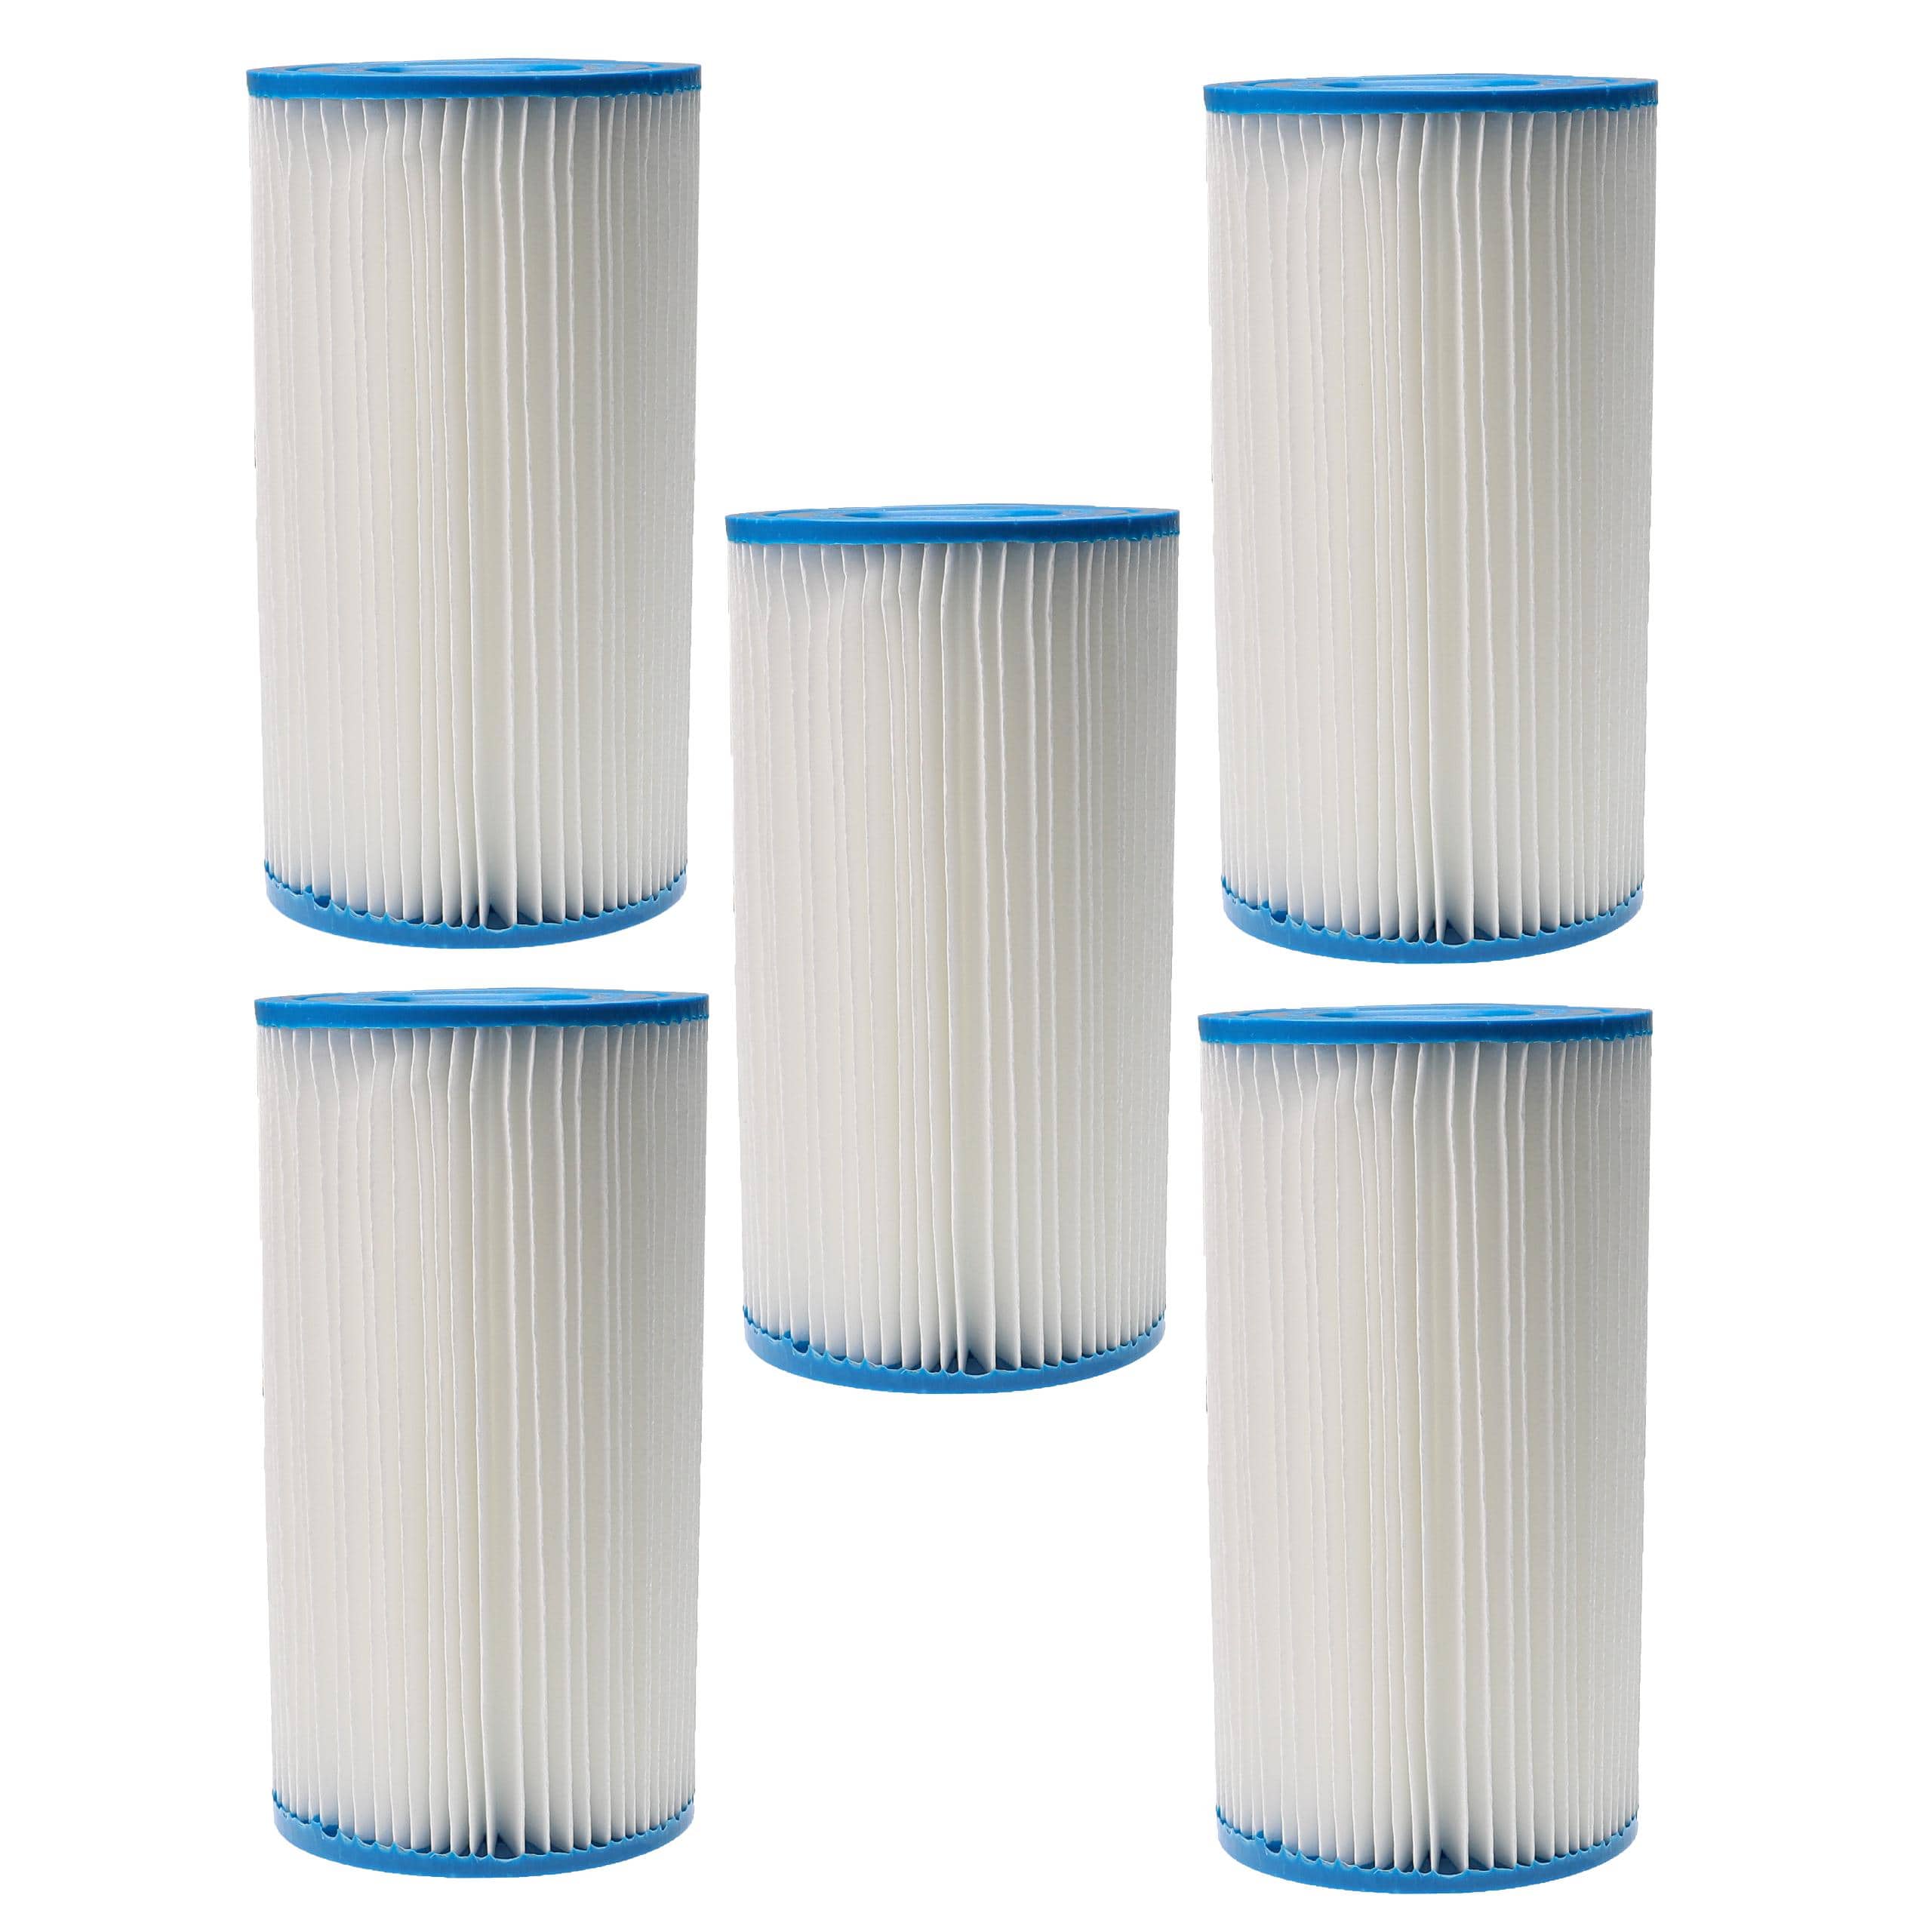 5x Water Filter replaces Intex filter type A for Intex Swimming Pool & Pump - Filter Cartridge